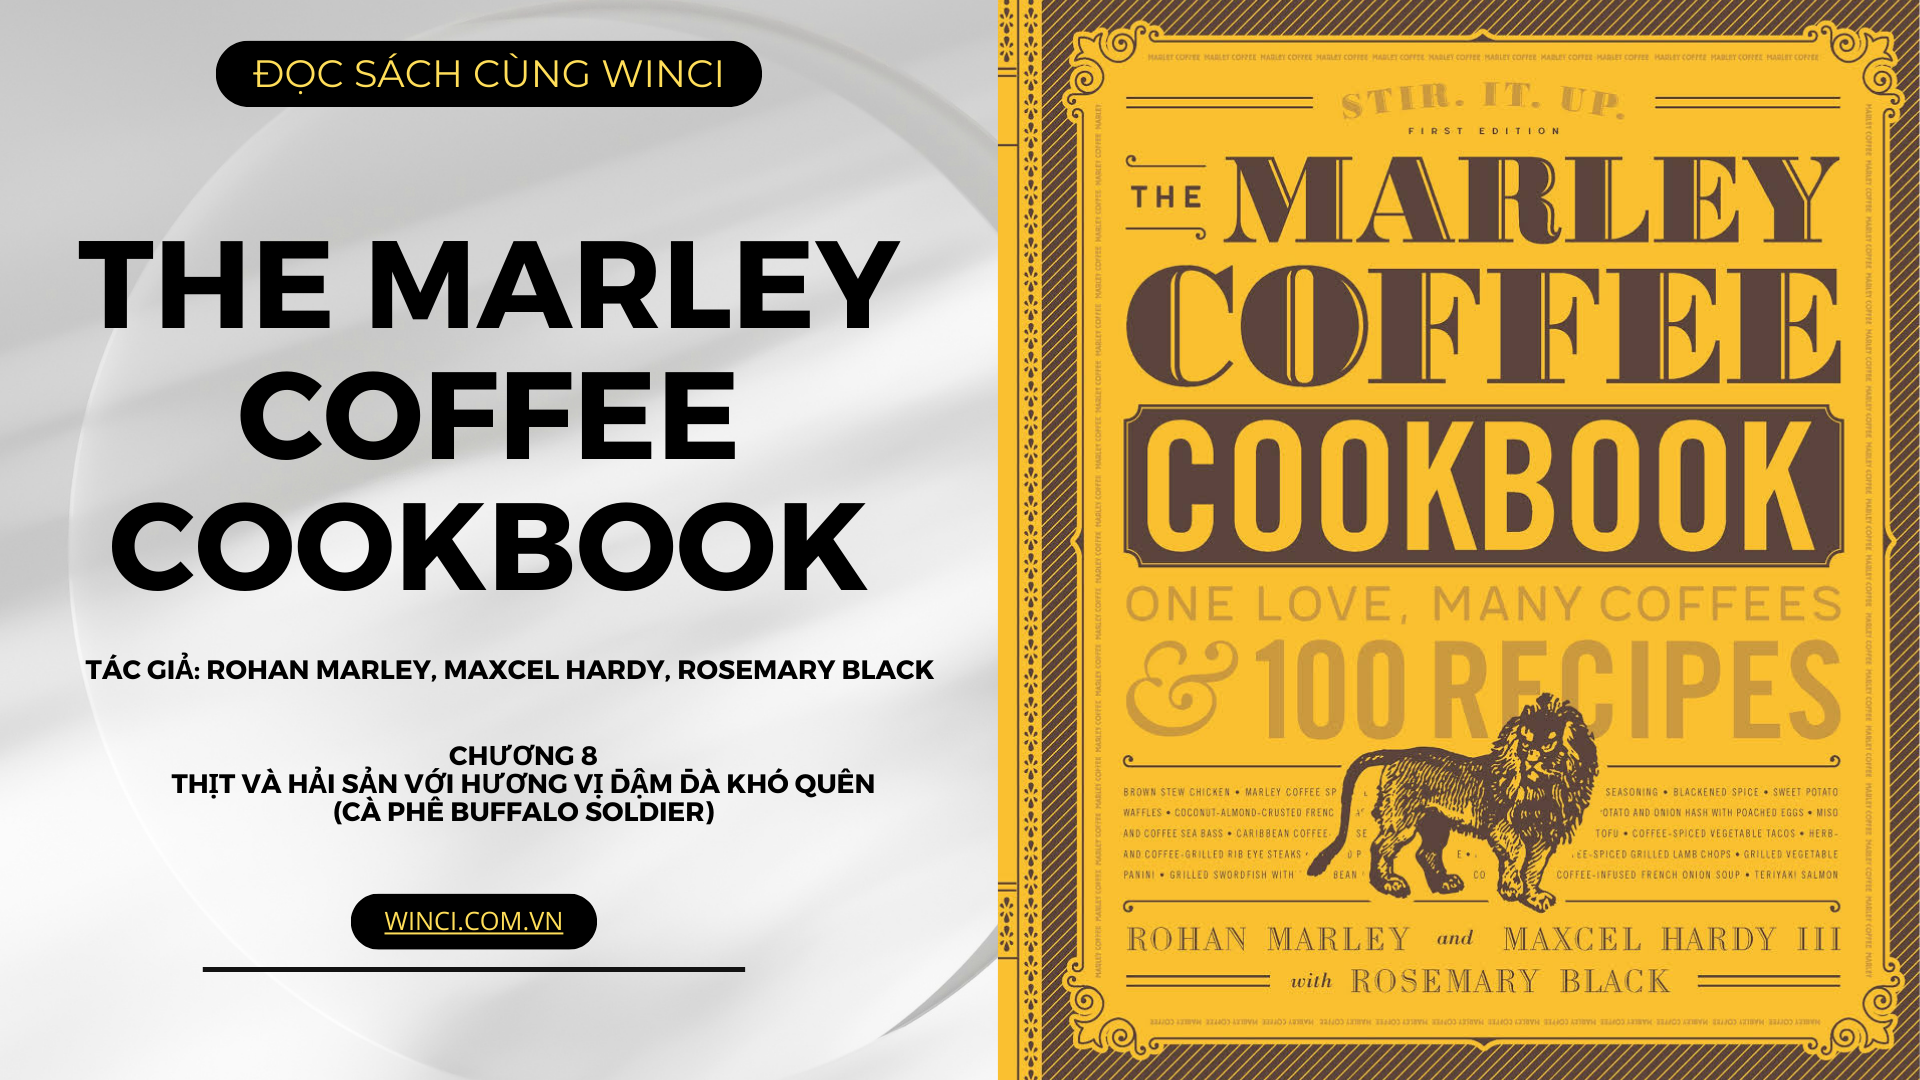 Marley Coffee Cookbook One Love, Many Coffees, And 100 Recipes